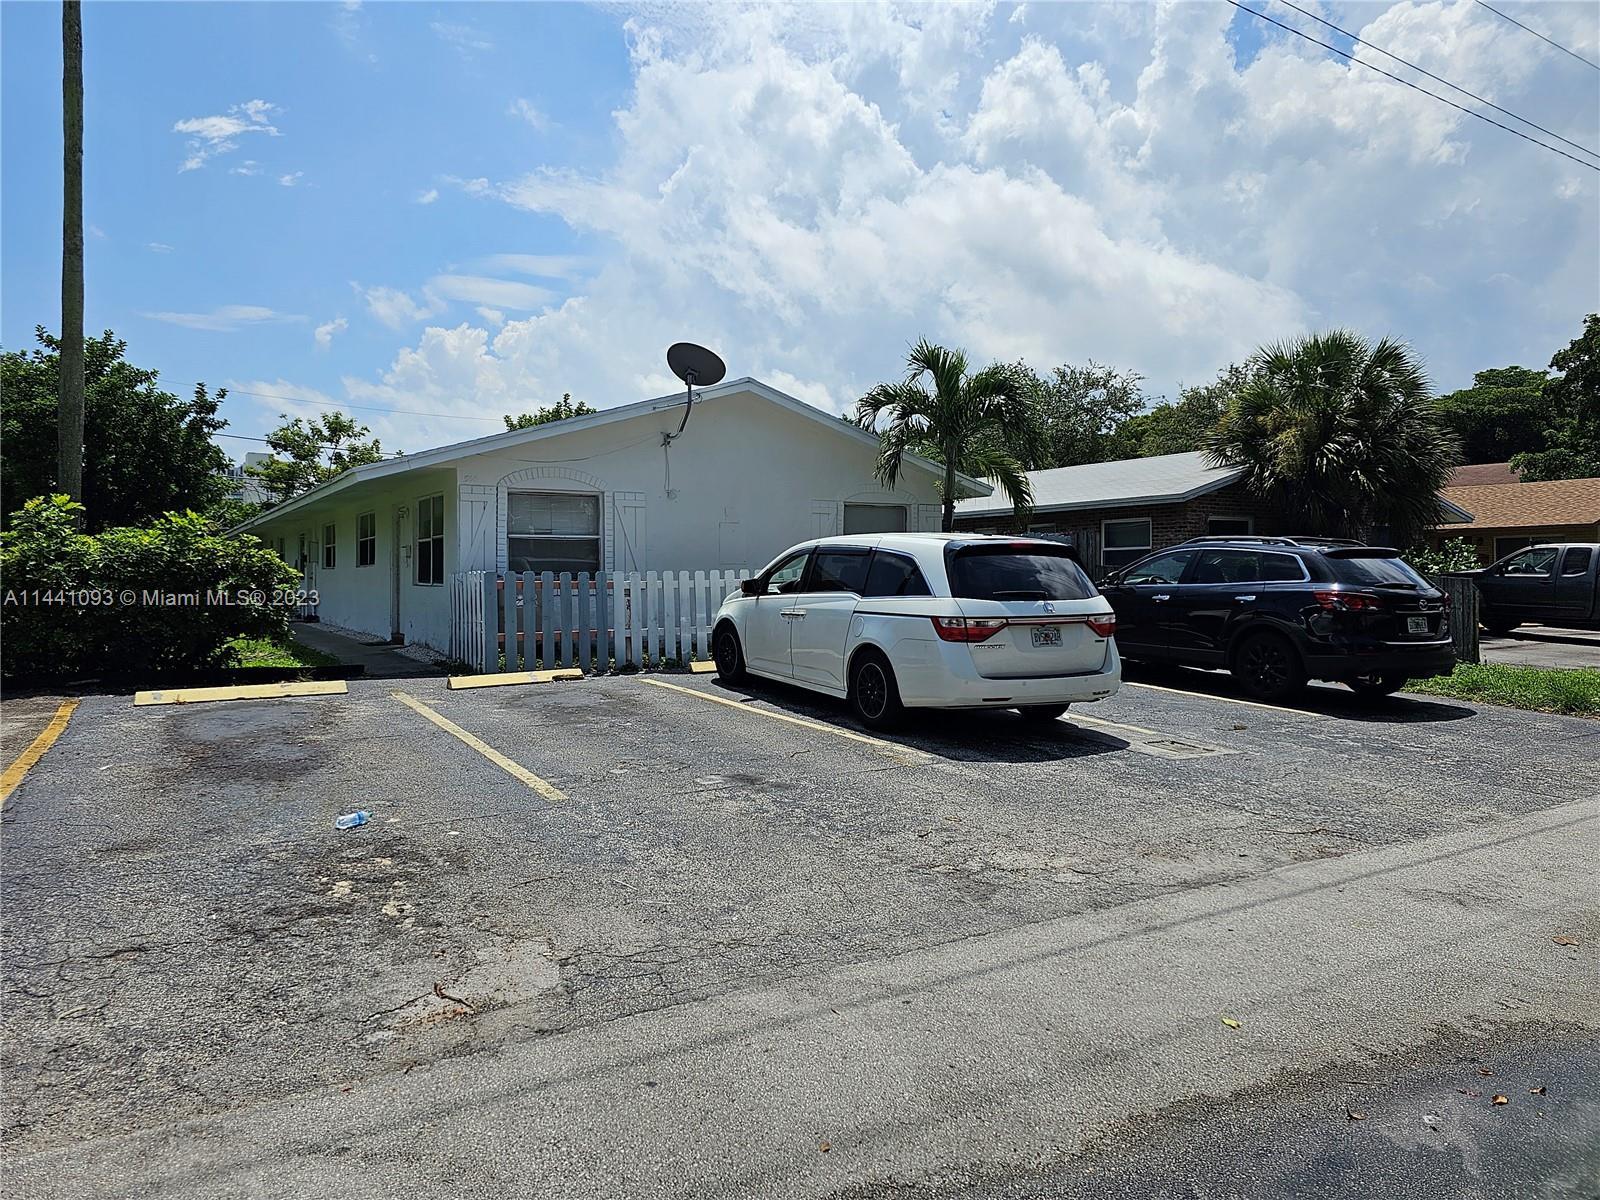 This is a fabulous investment property in the heart of Pompano Beach! Solid rental area close to I-9